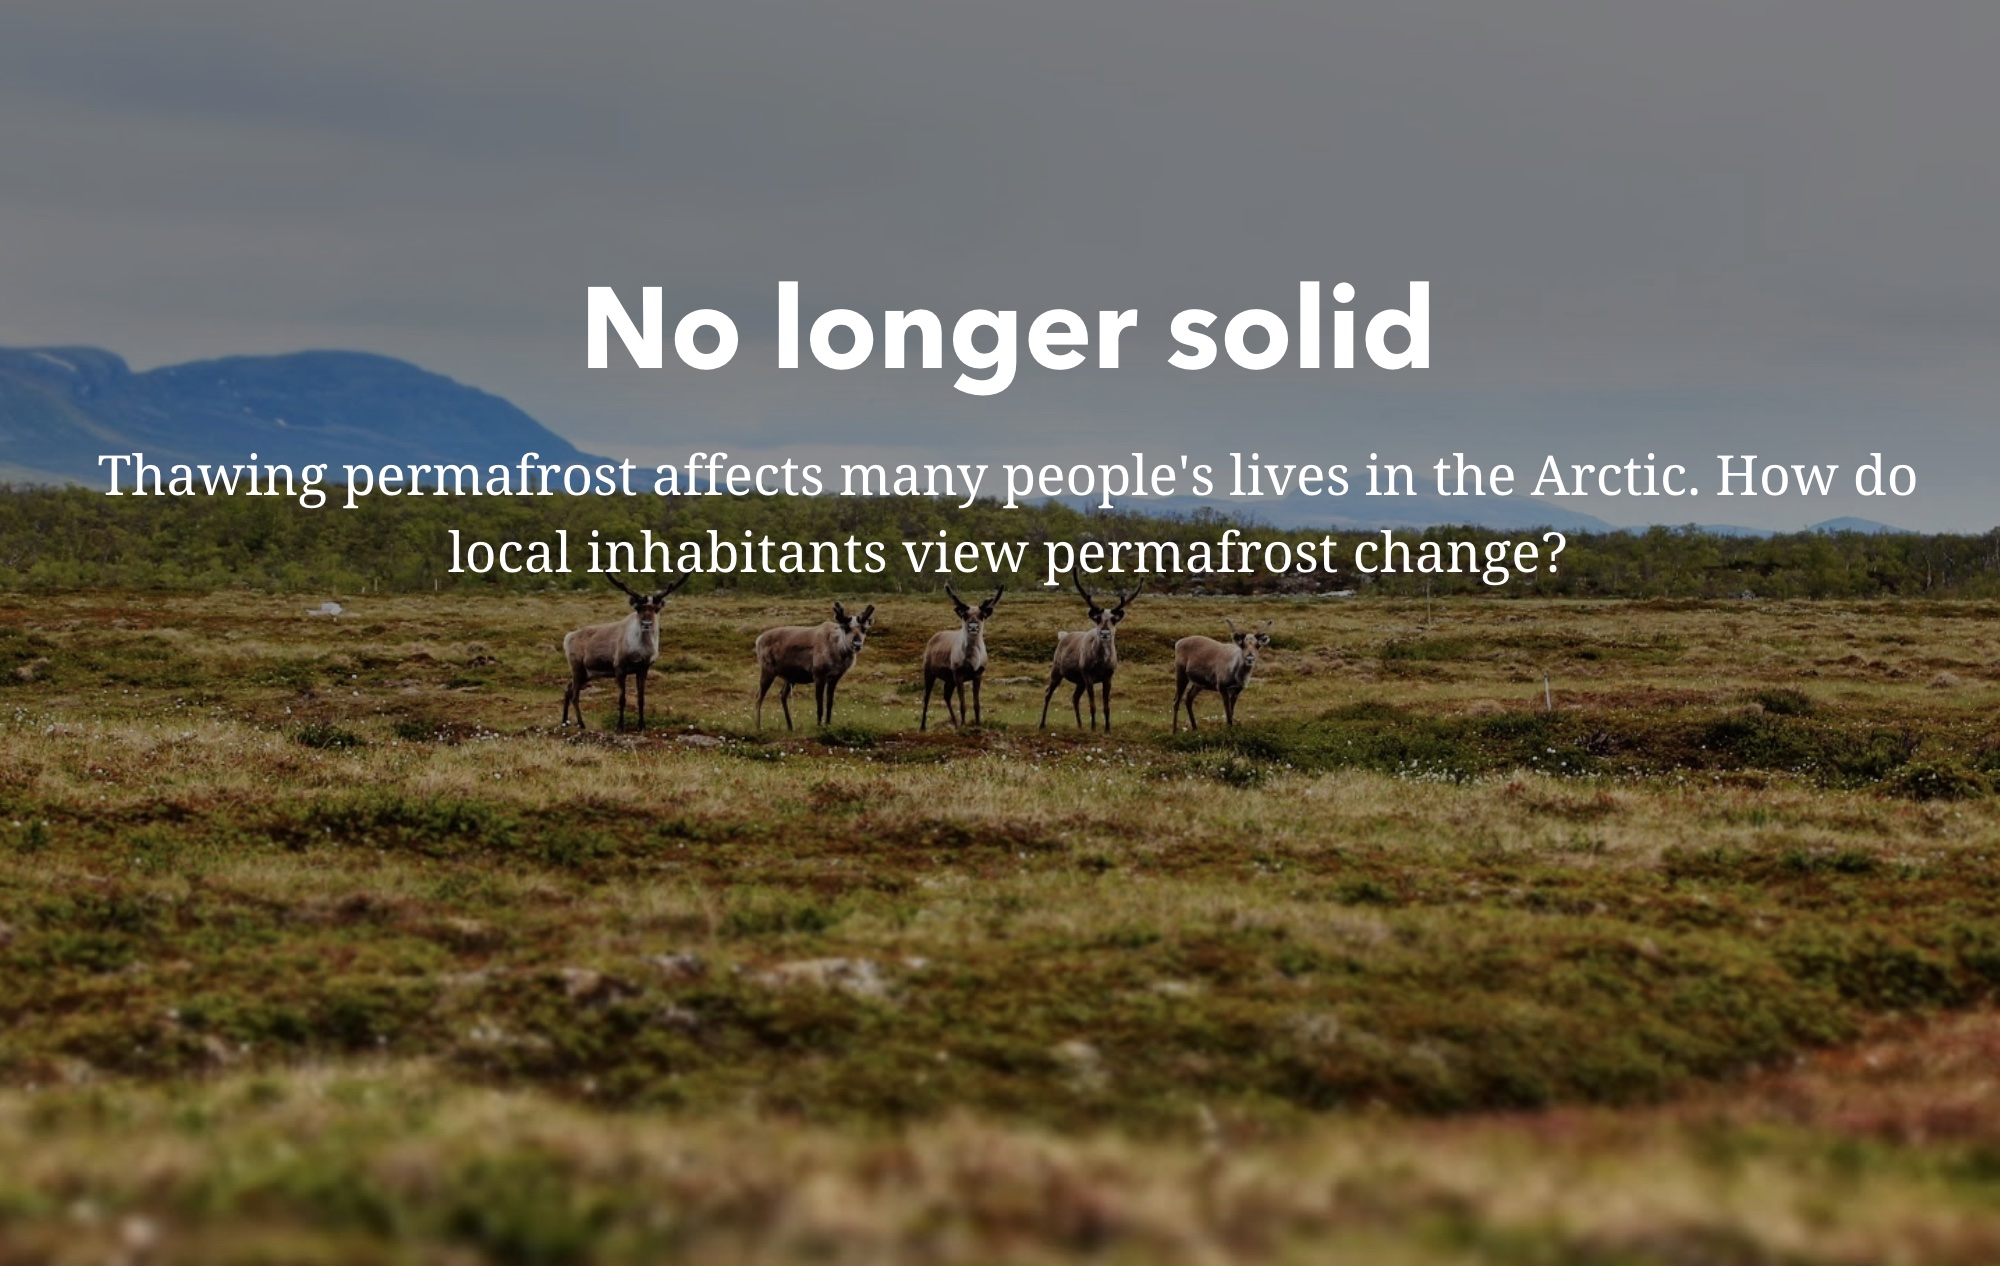 How do local Arctic inhabitants view permafrost change? New Story Map out on the findings.